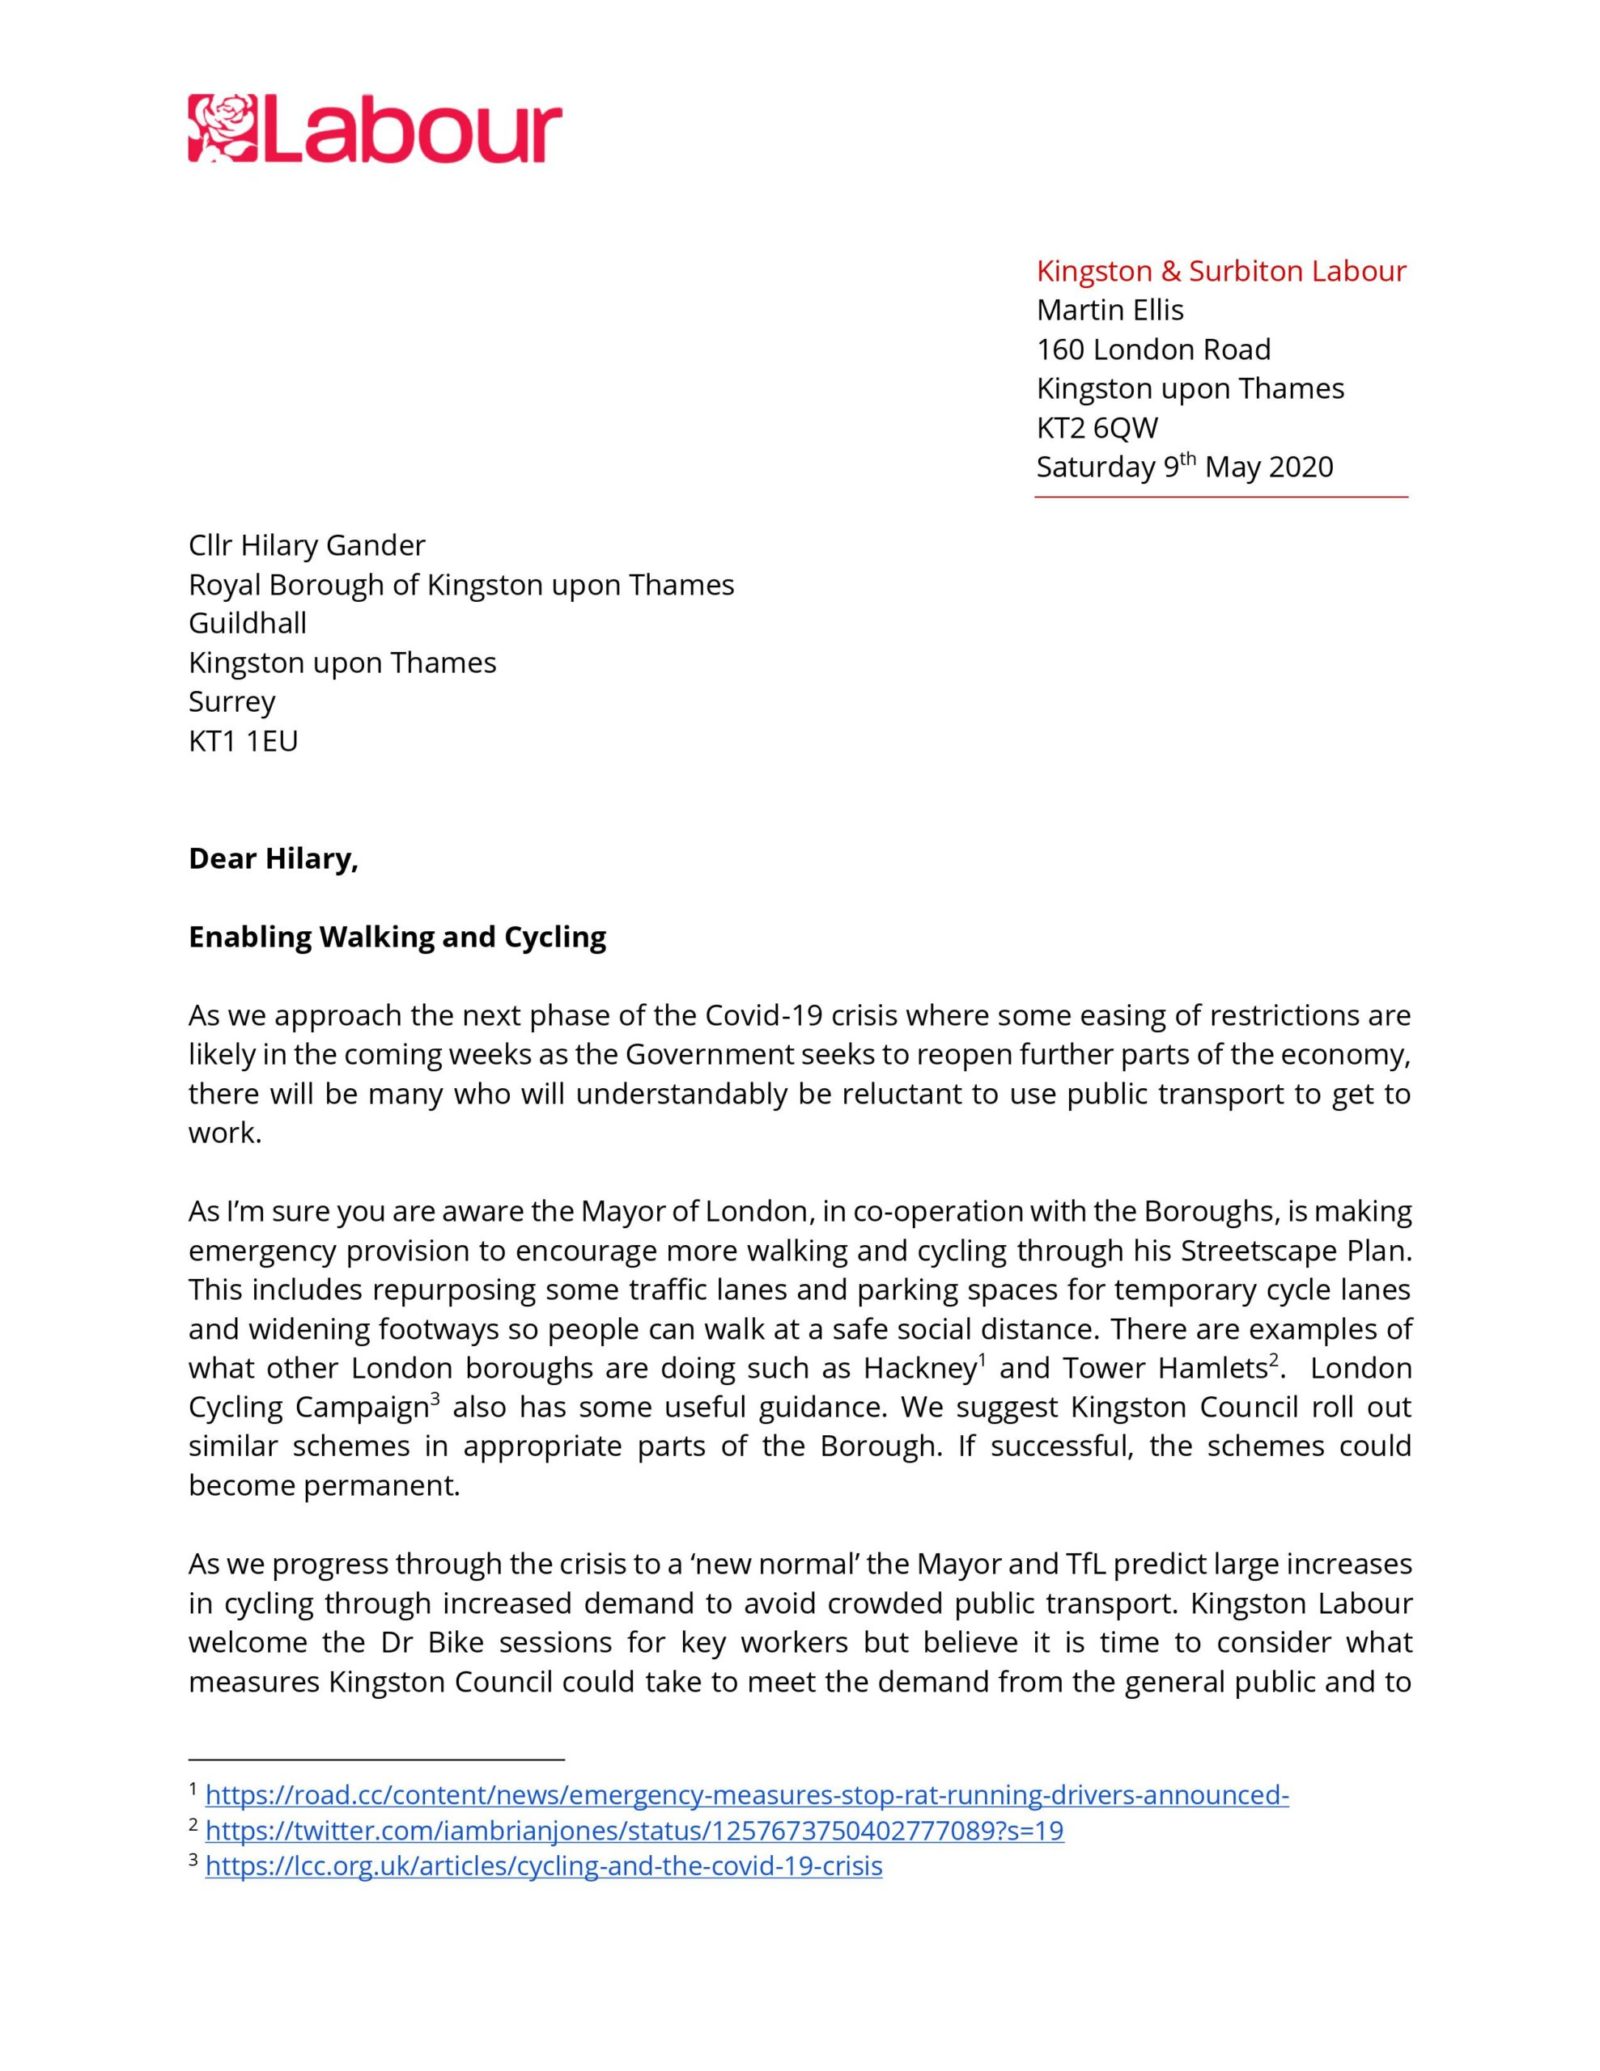 Letter to Council re Cycling & Walking